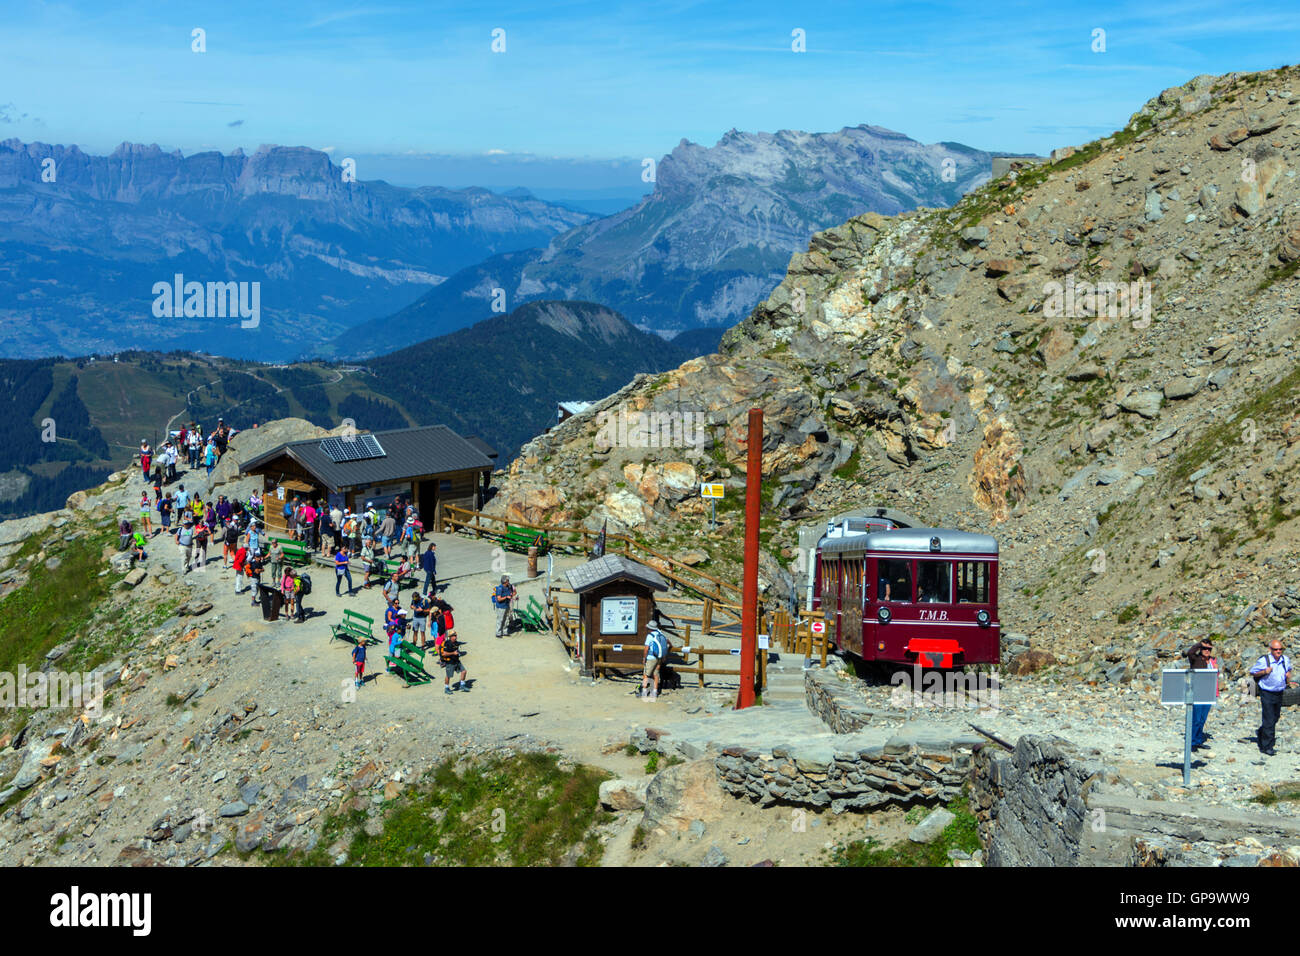 Crowds of hikers, climbers and tourists at the Nid d'AIgle, Mont Stock  Photo - Alamy